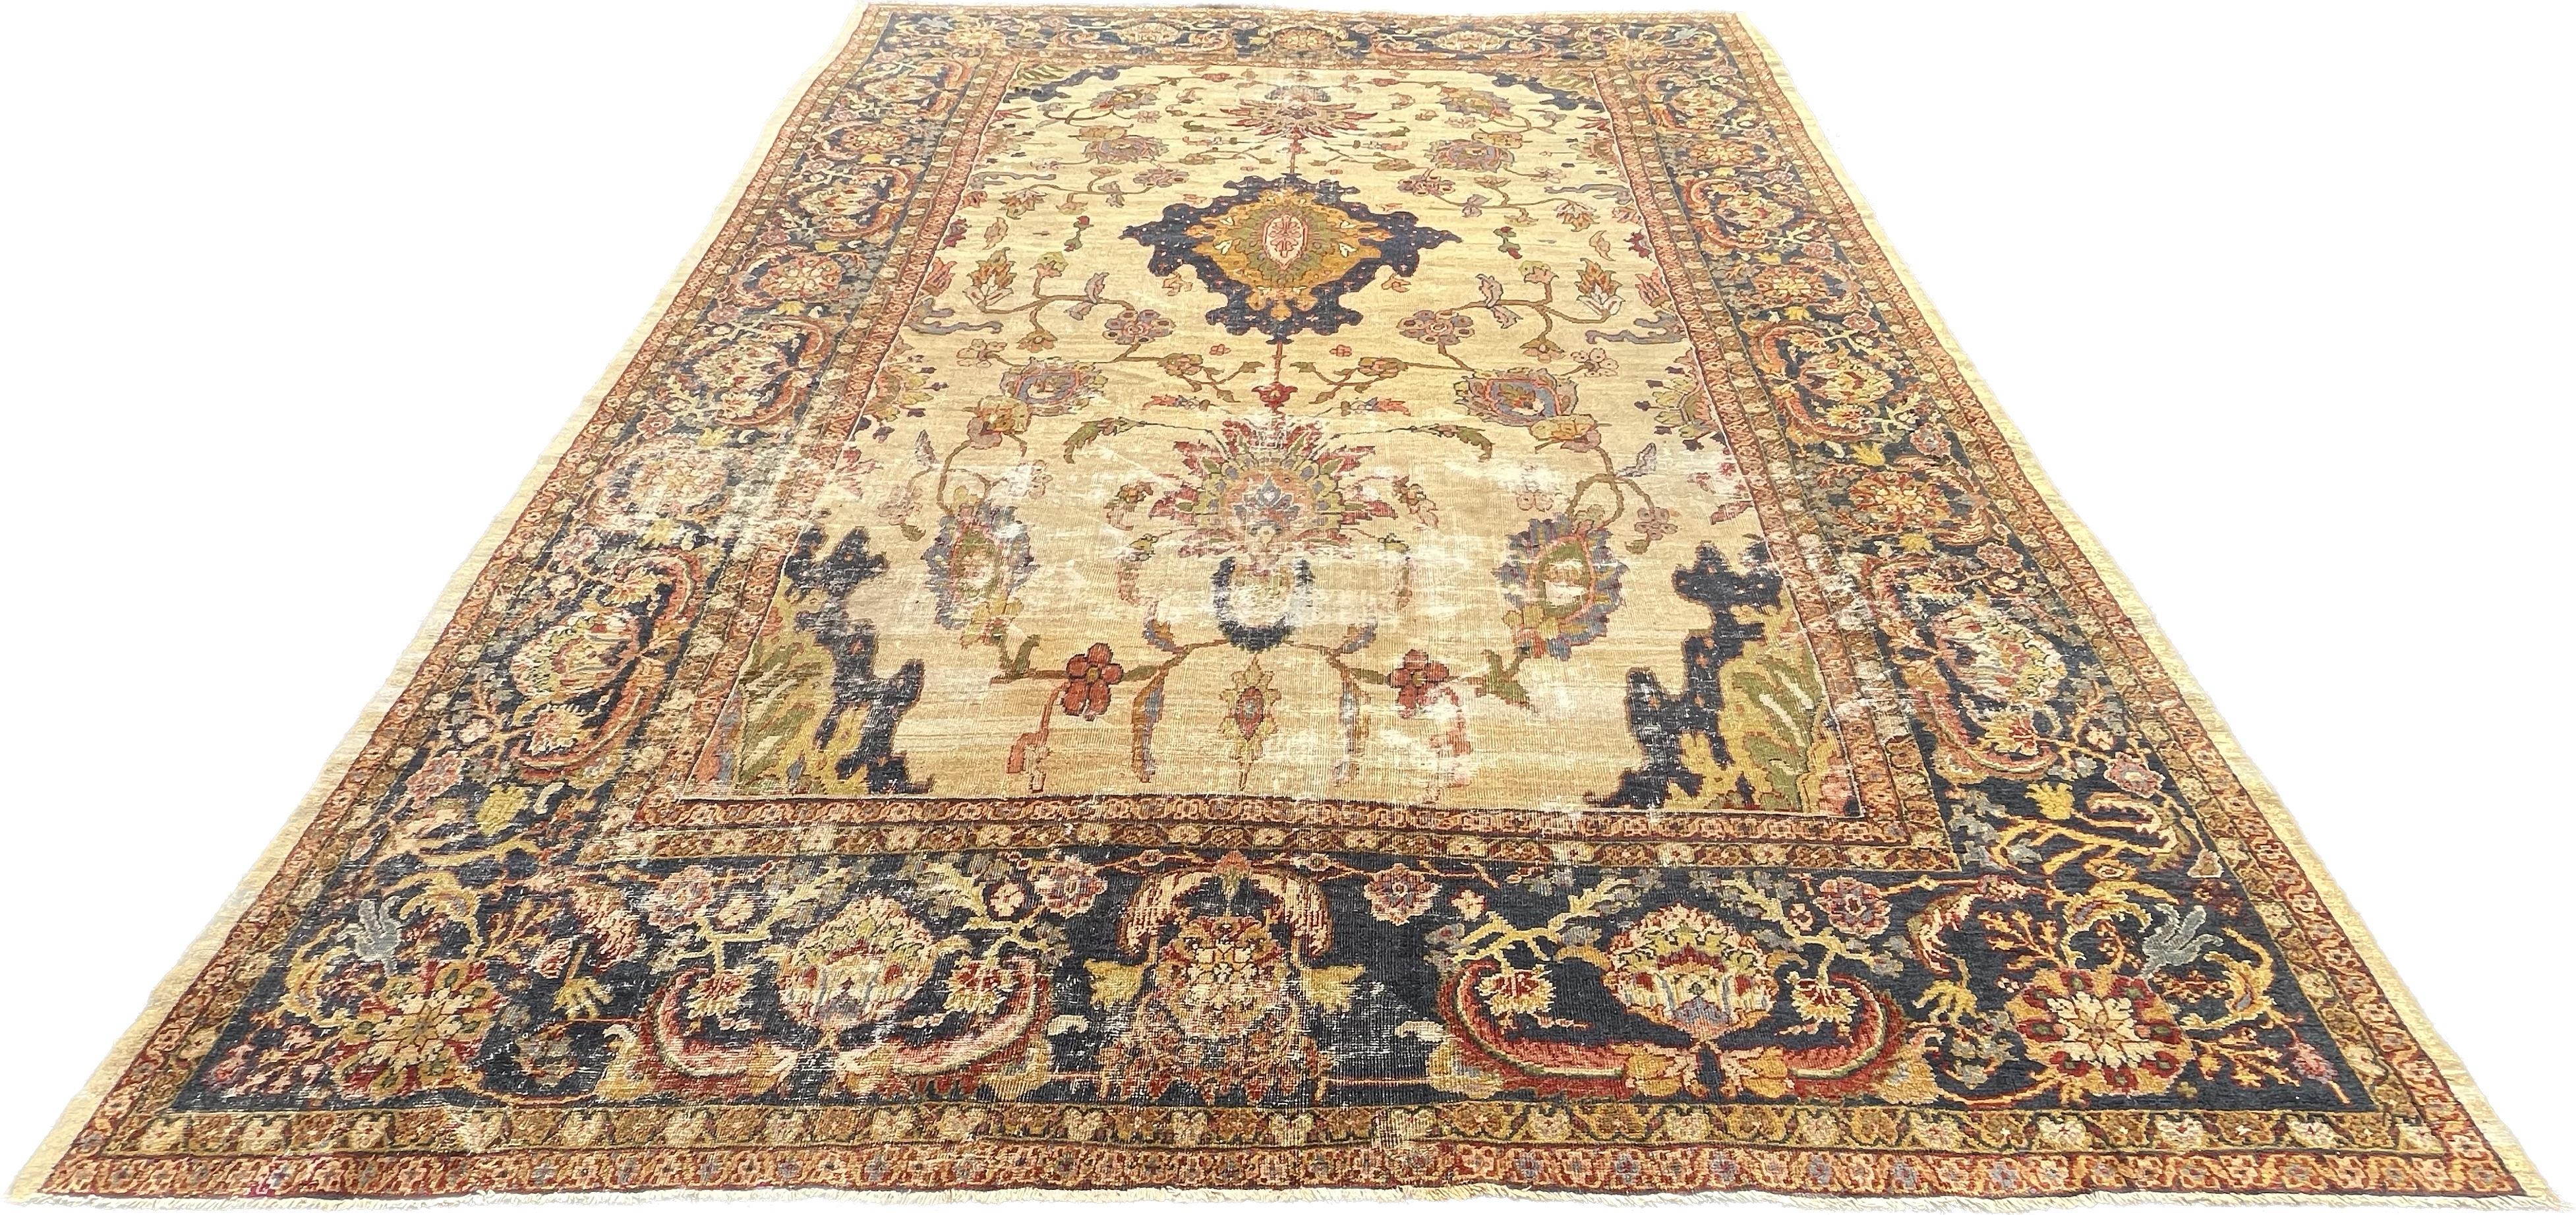 Antique Carpet From The Mahal Sultanabad Collection Circa 1880. 432x312 Cm

Sultanabad Antique Carpets The city of Sultanabad (now known as Arak) was founded in the early 1800s as a center of commercial carpet production in Iran.
At the end of the